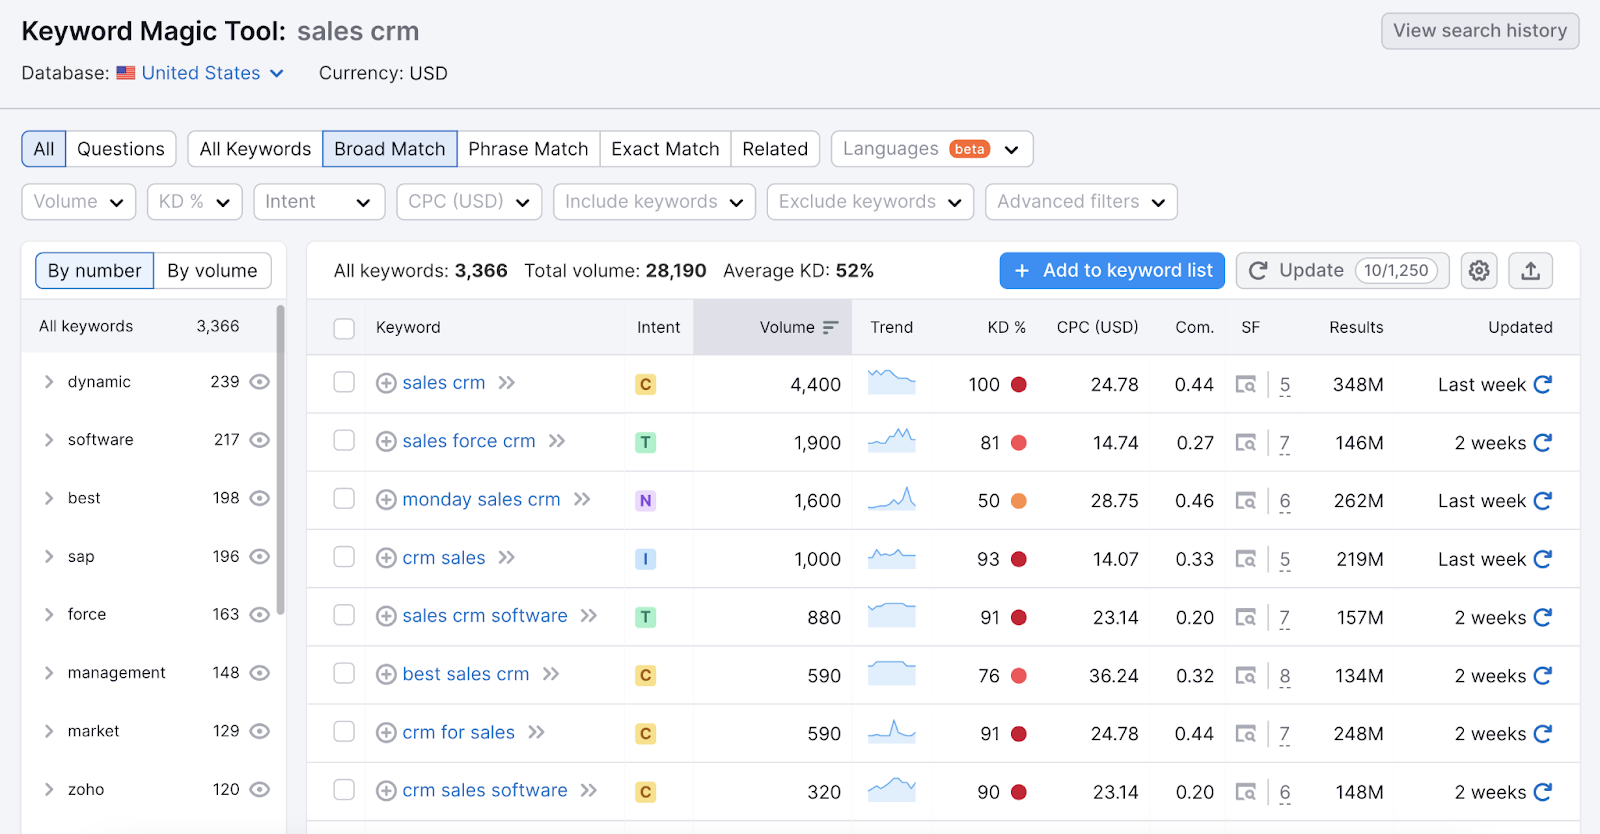 Keyword Magic Tool results for "sales crm"